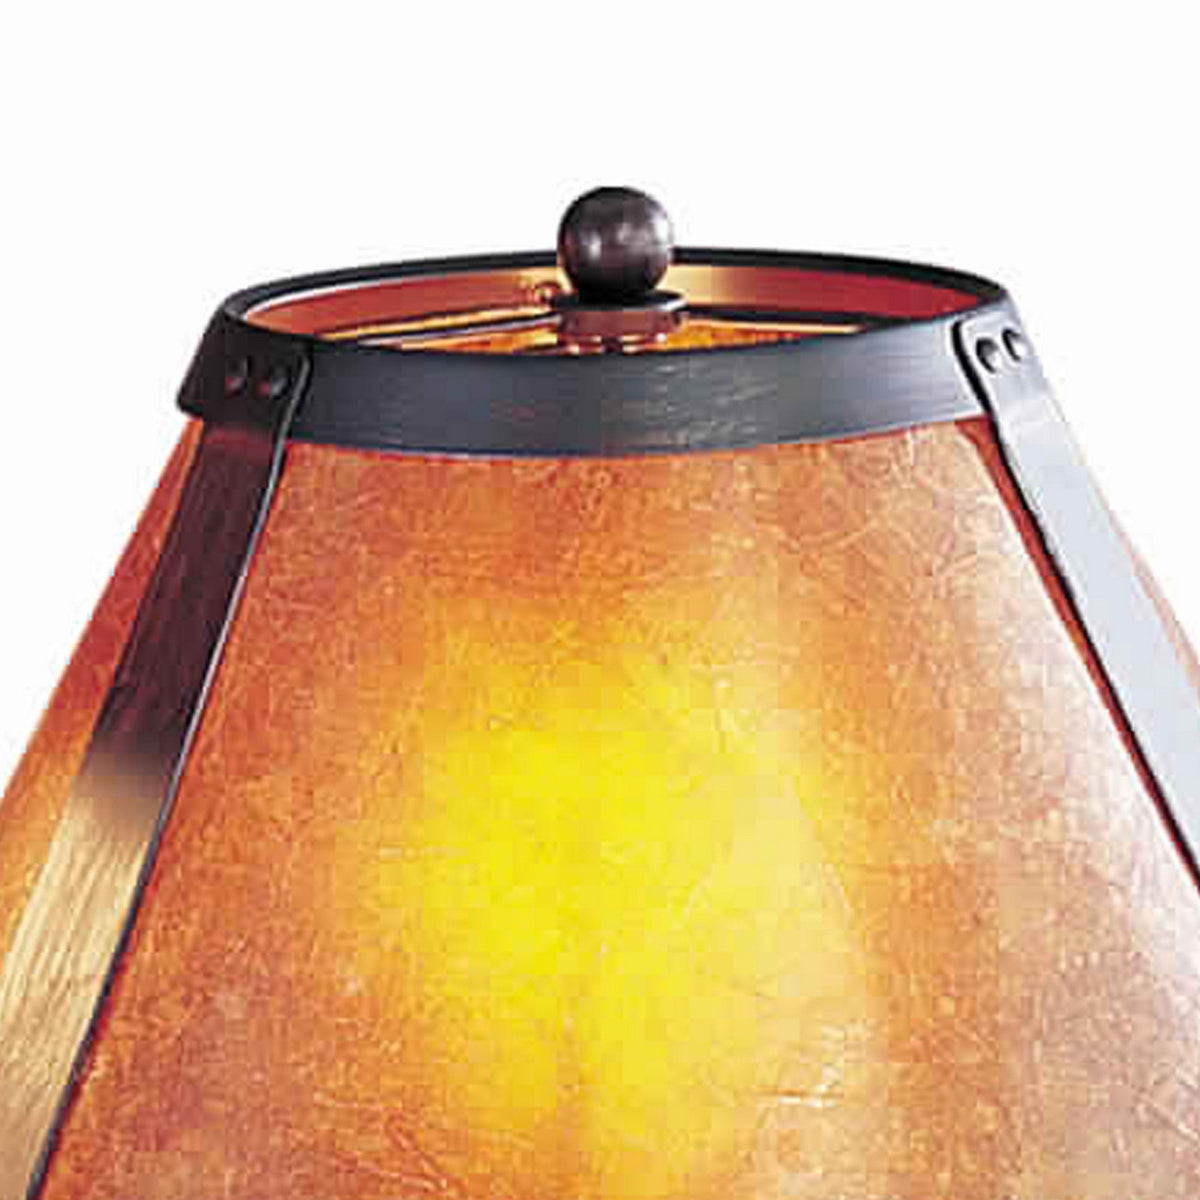 Metal Body Swing Arm Table Lamp with Conical Mica Shade, Bronze - BM223703